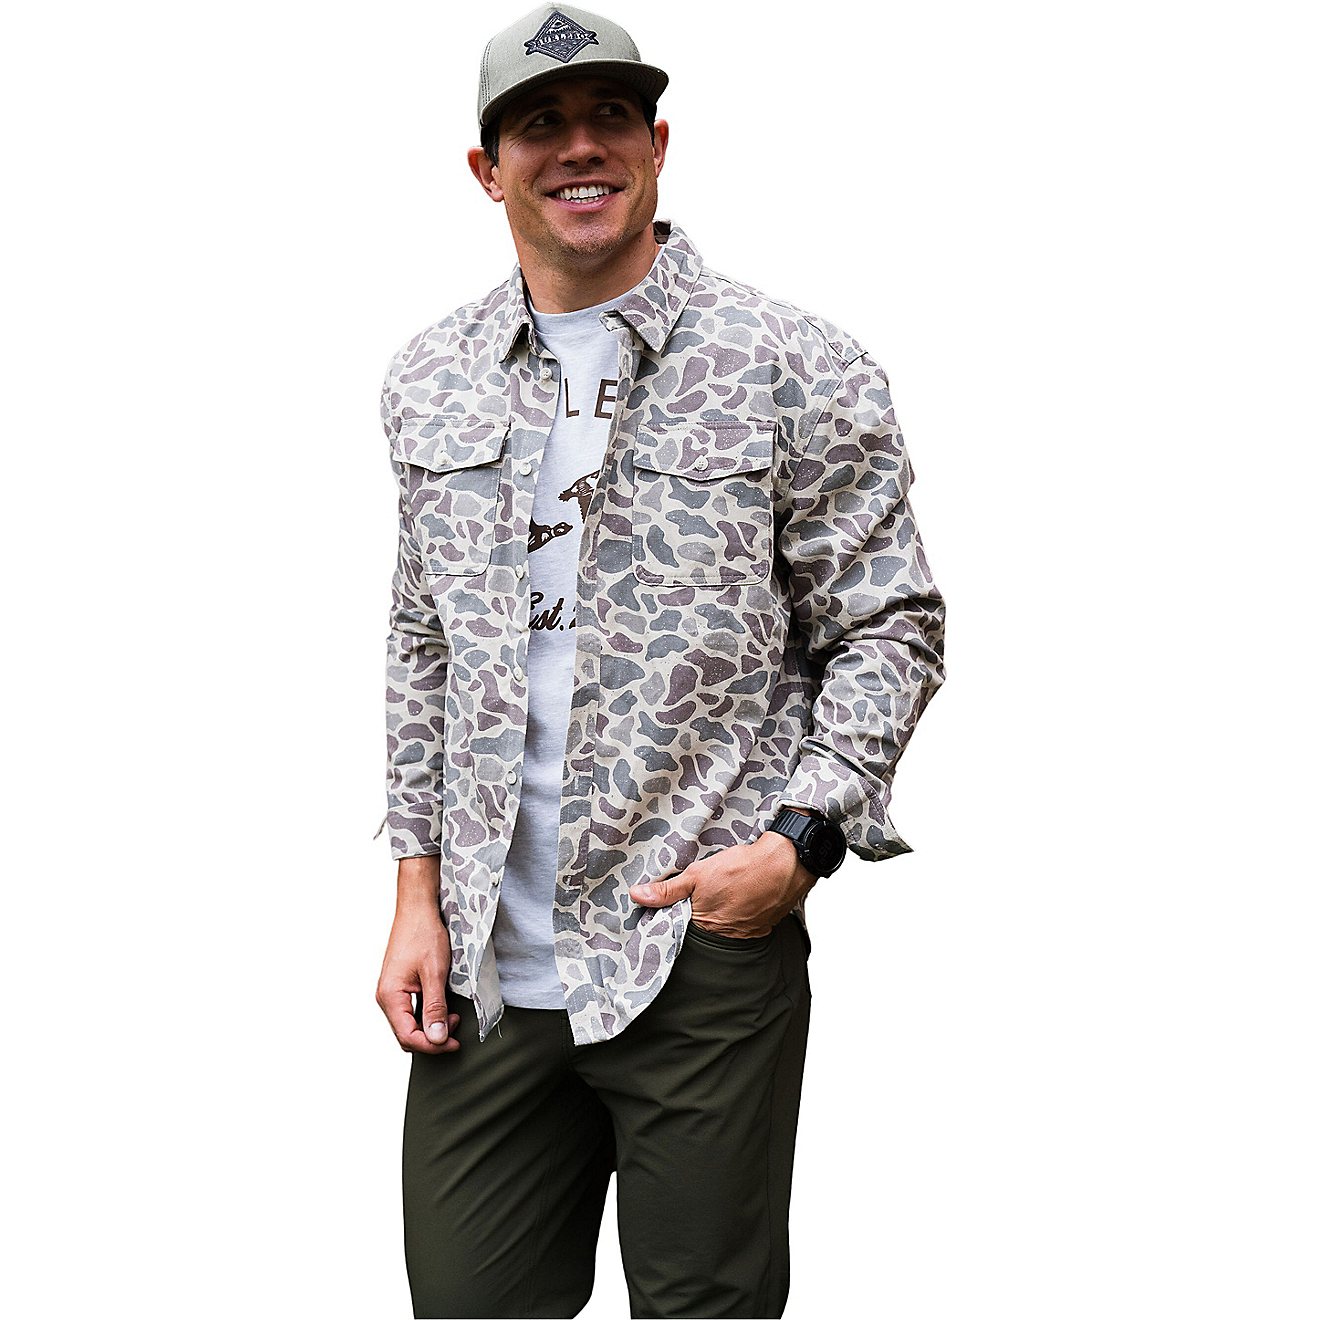 BURLEBO Men's Cotton Twill Button Up Long Sleeve T-shirt                                                                         - view number 1